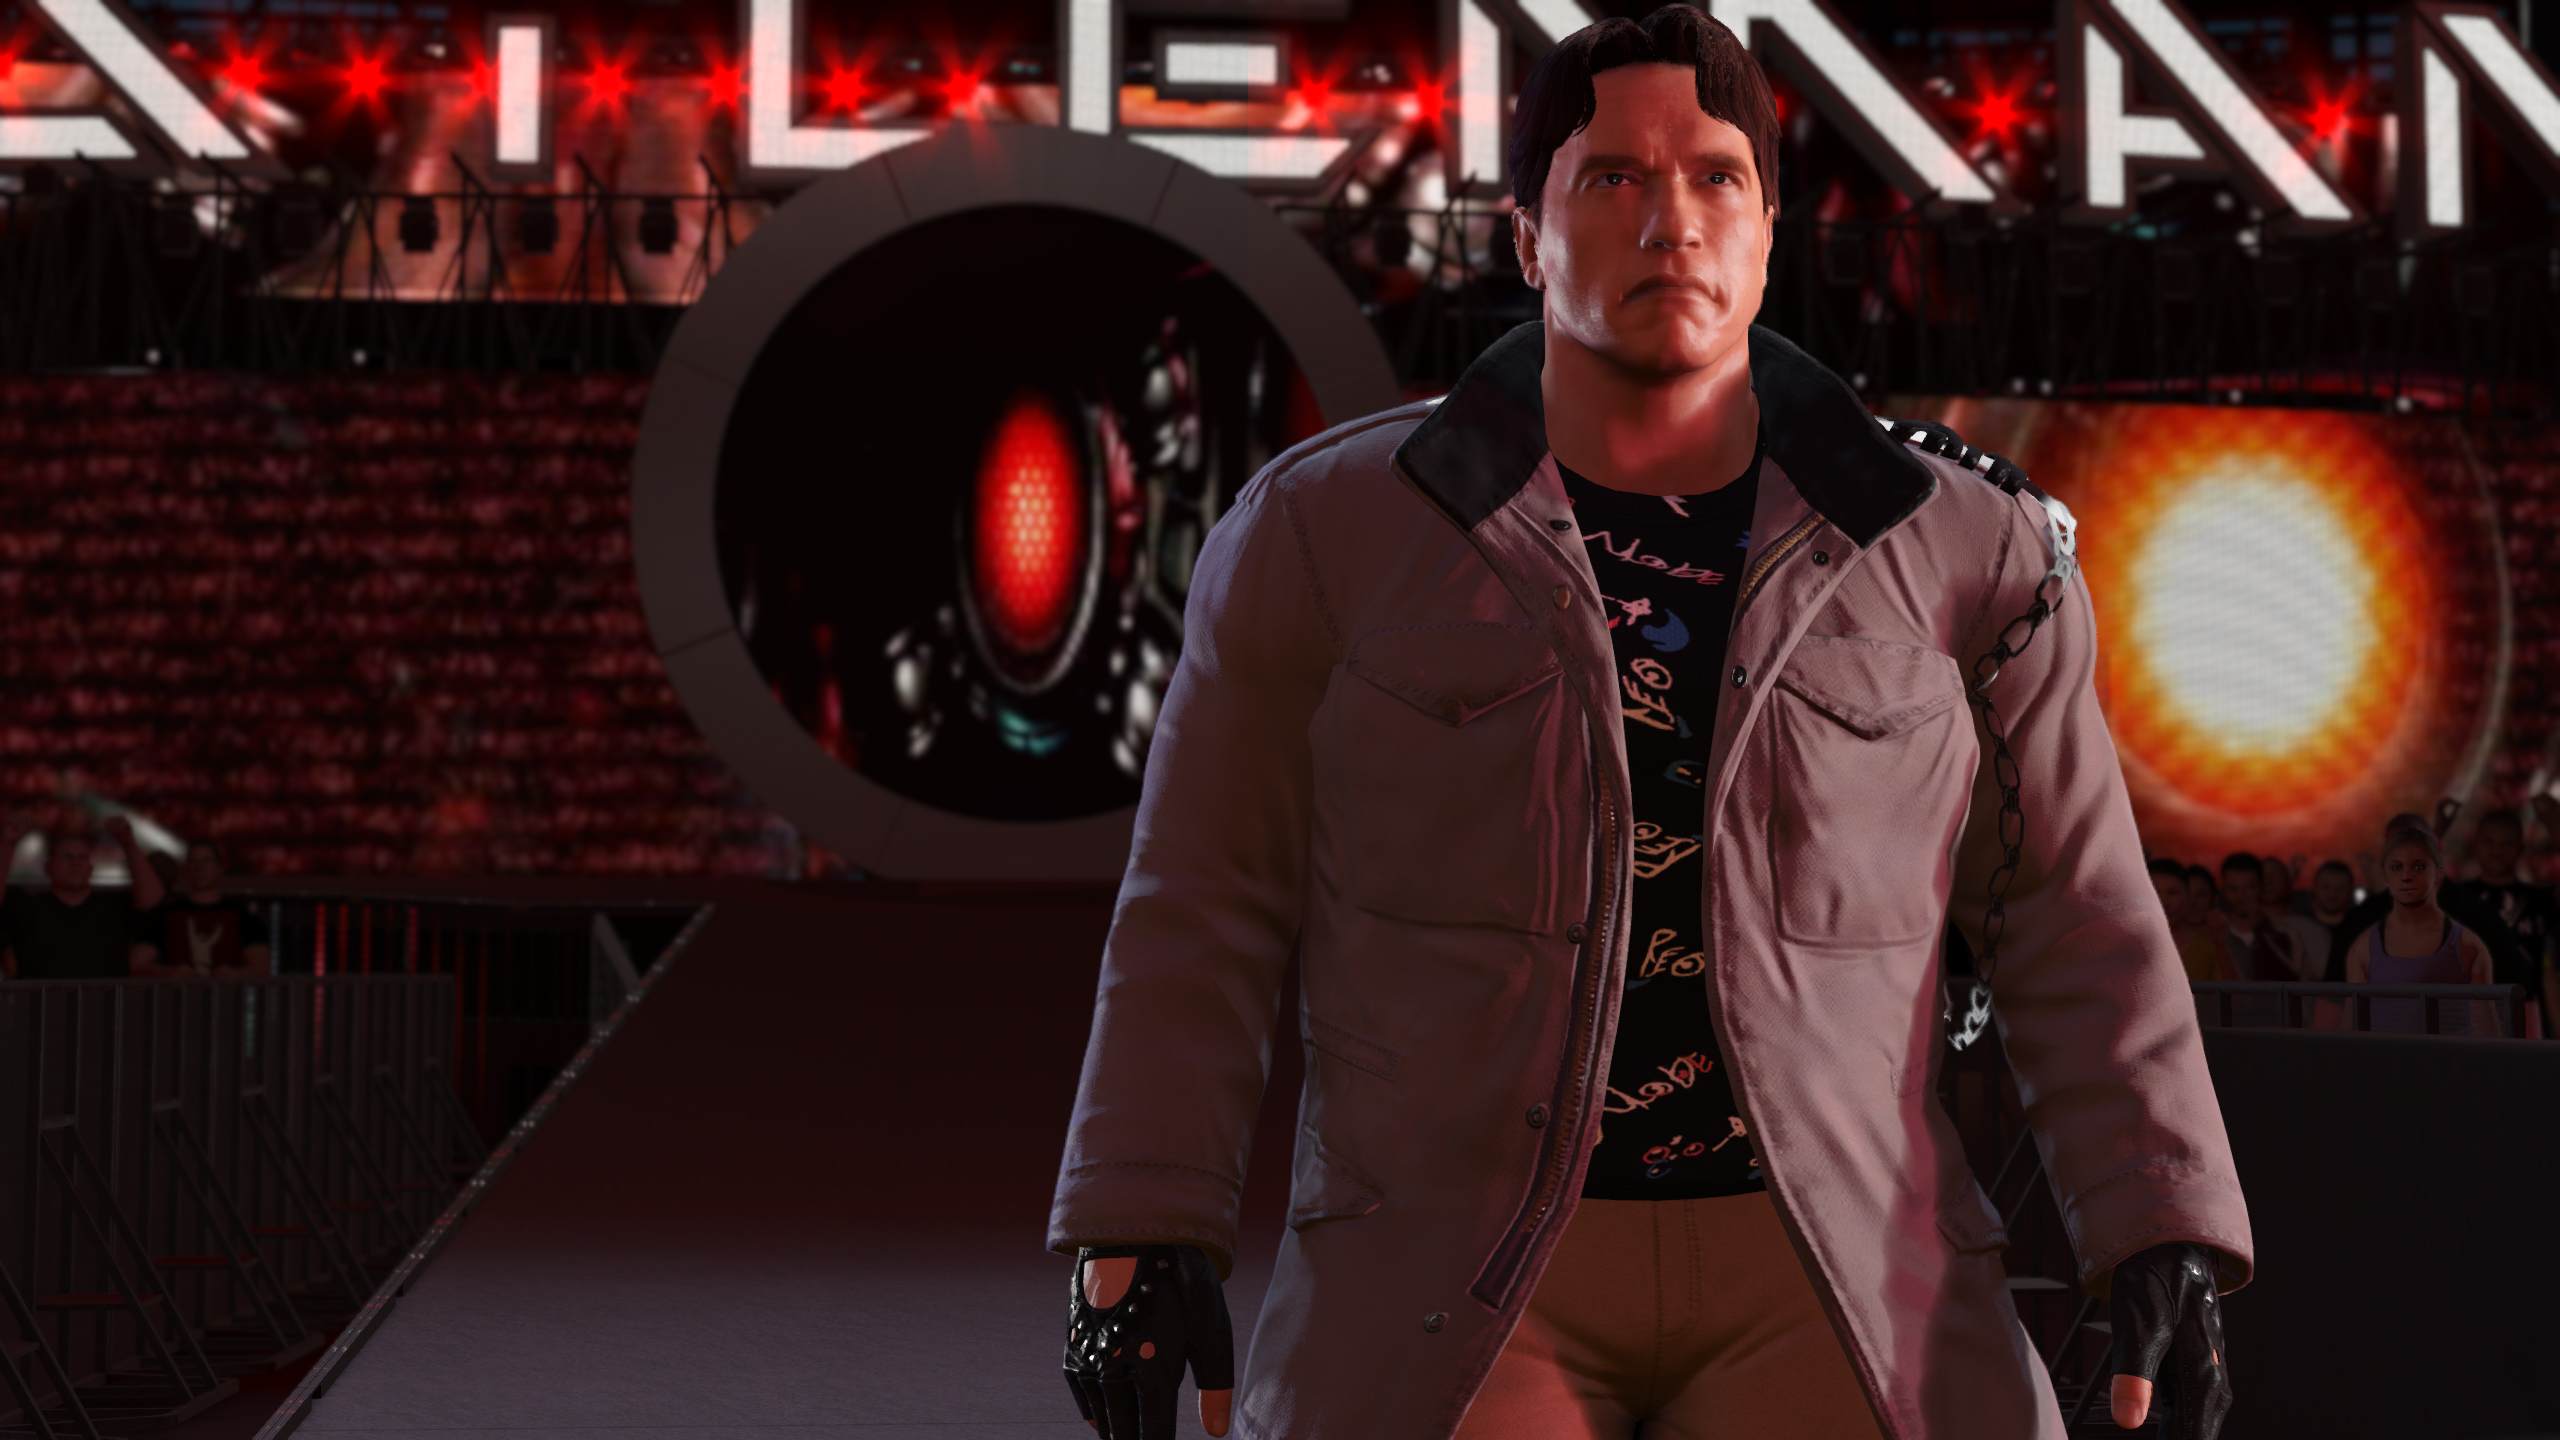 WWE 2K16 will be coming to PC in March